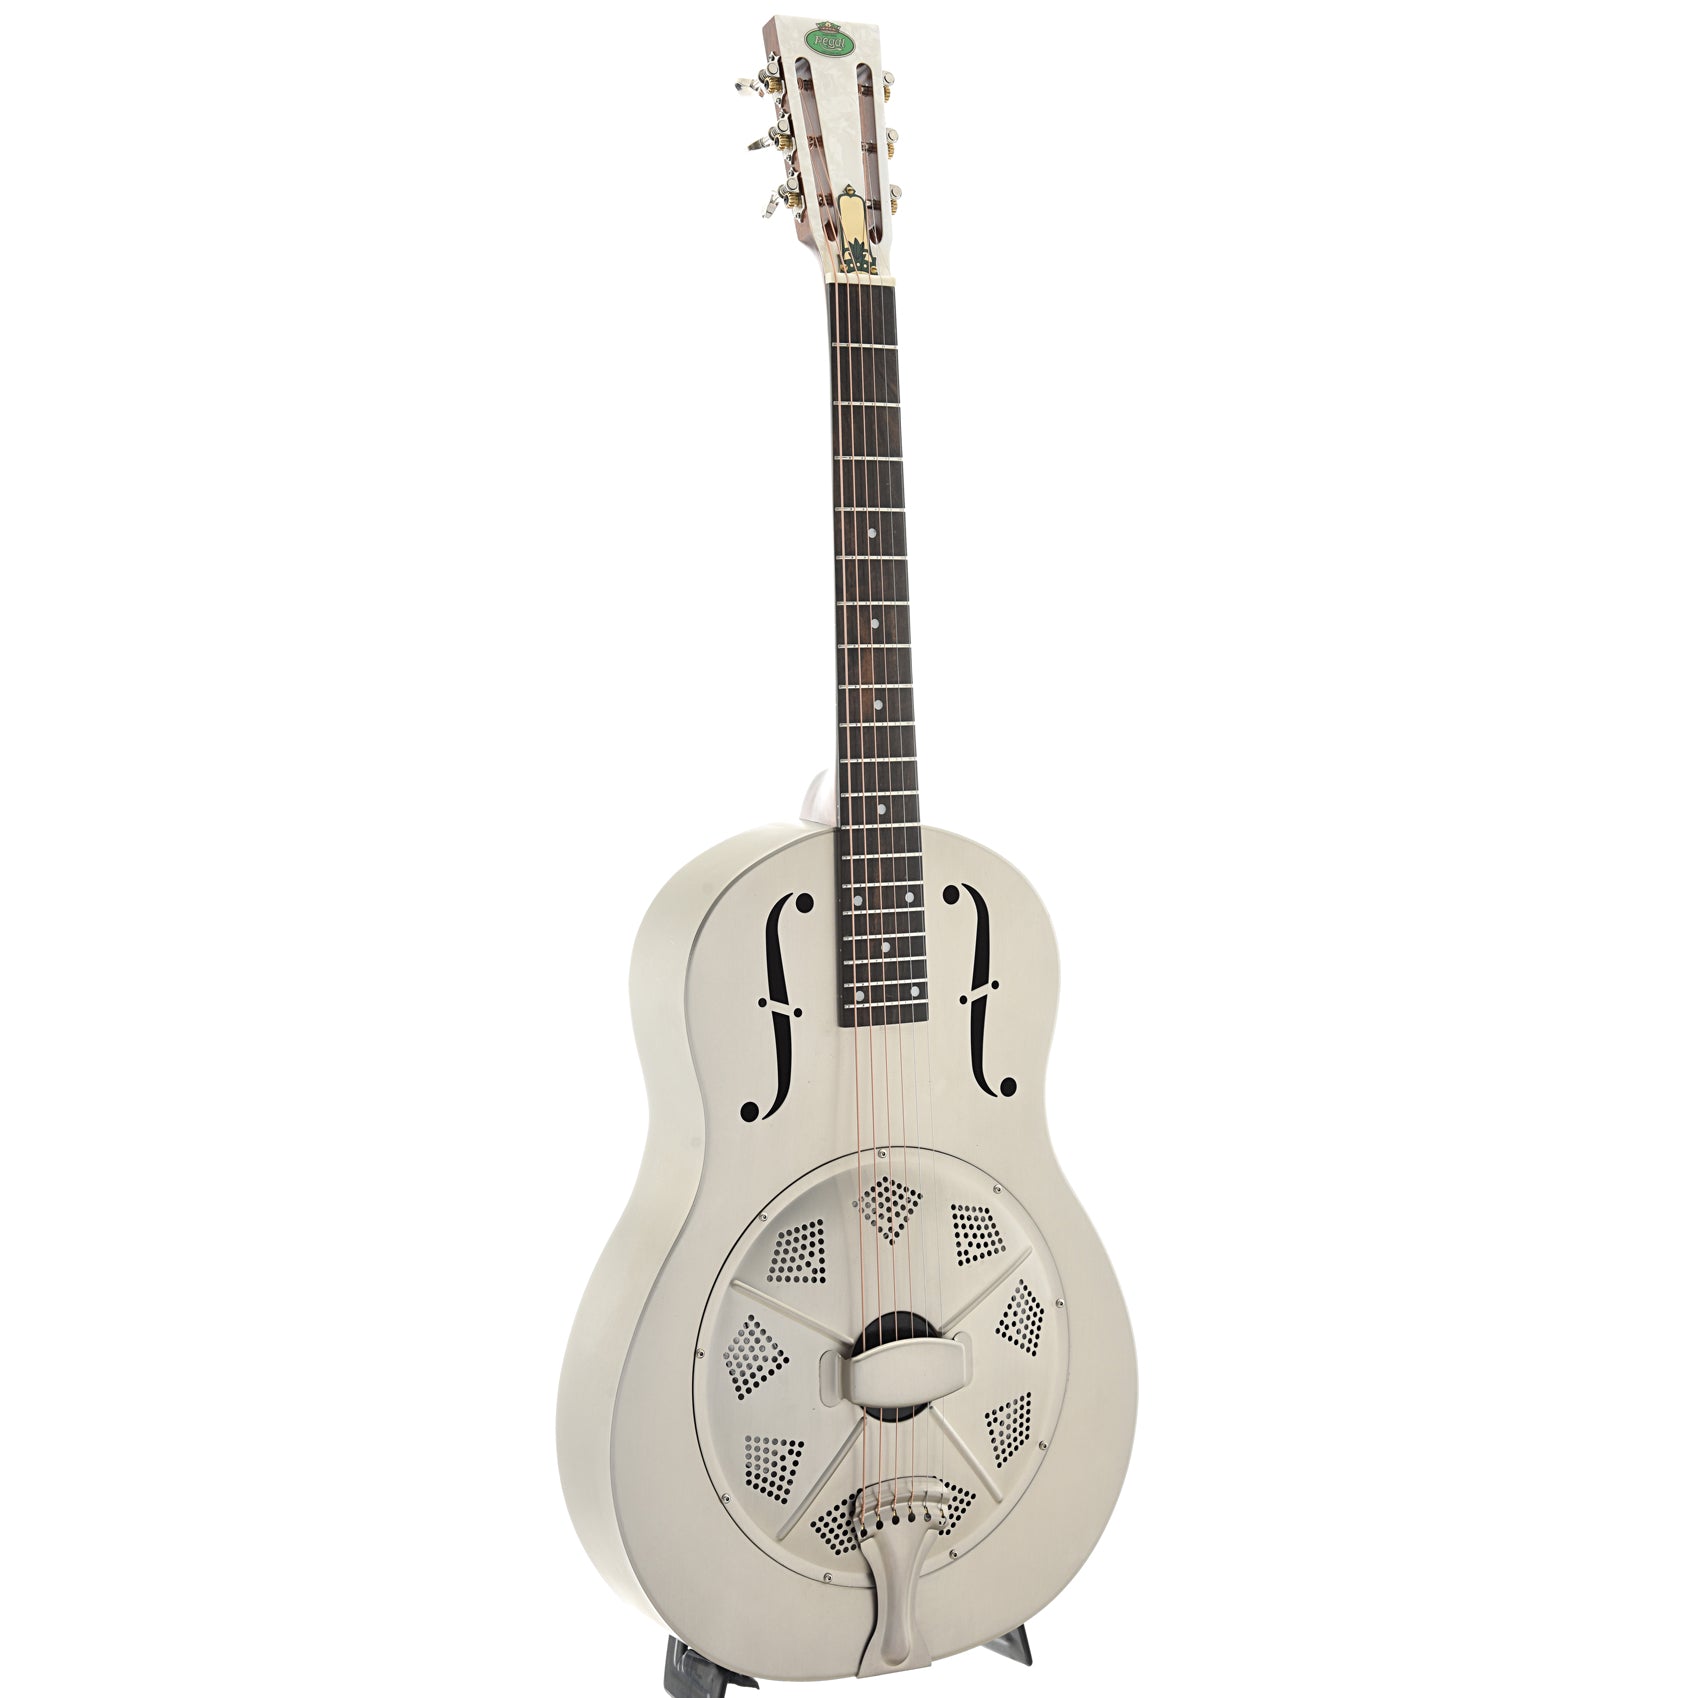 Full Front and Side of Regal RC-43 "Triolian" Resonator Guitar